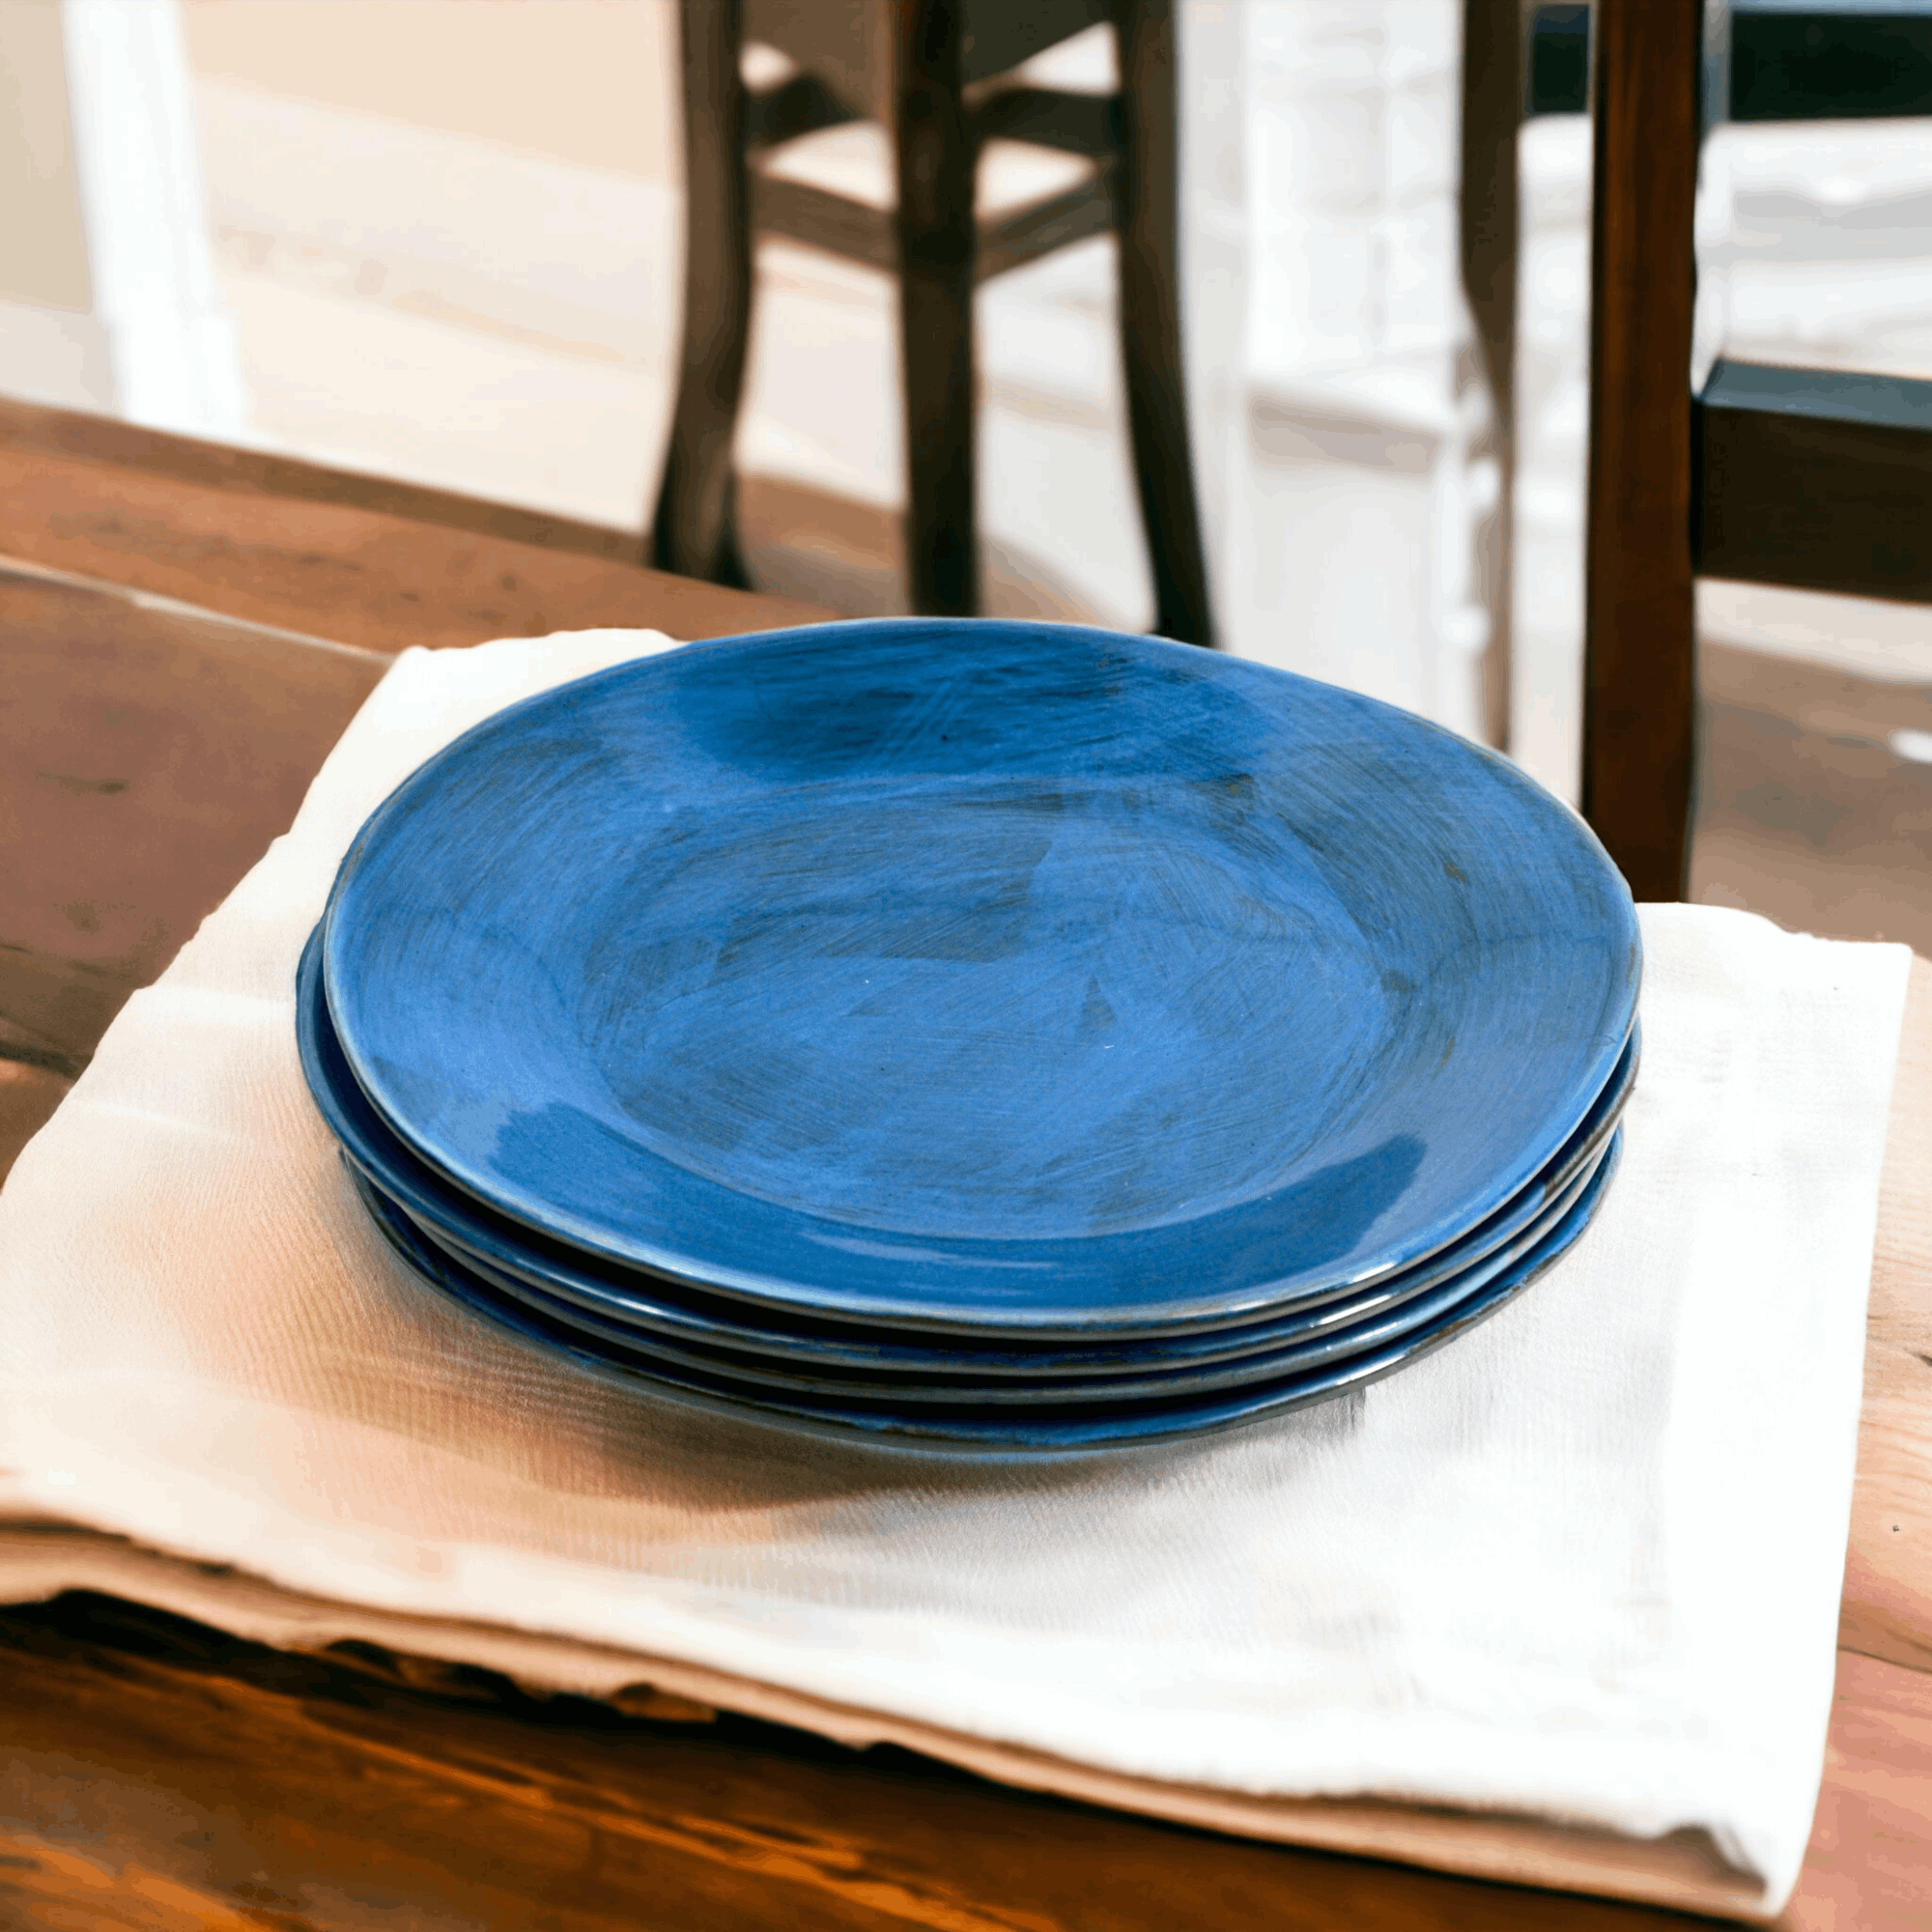 Tuscan Ceramic Dinner Plate, Set of 4, Cobalt Blue, Made in Italy